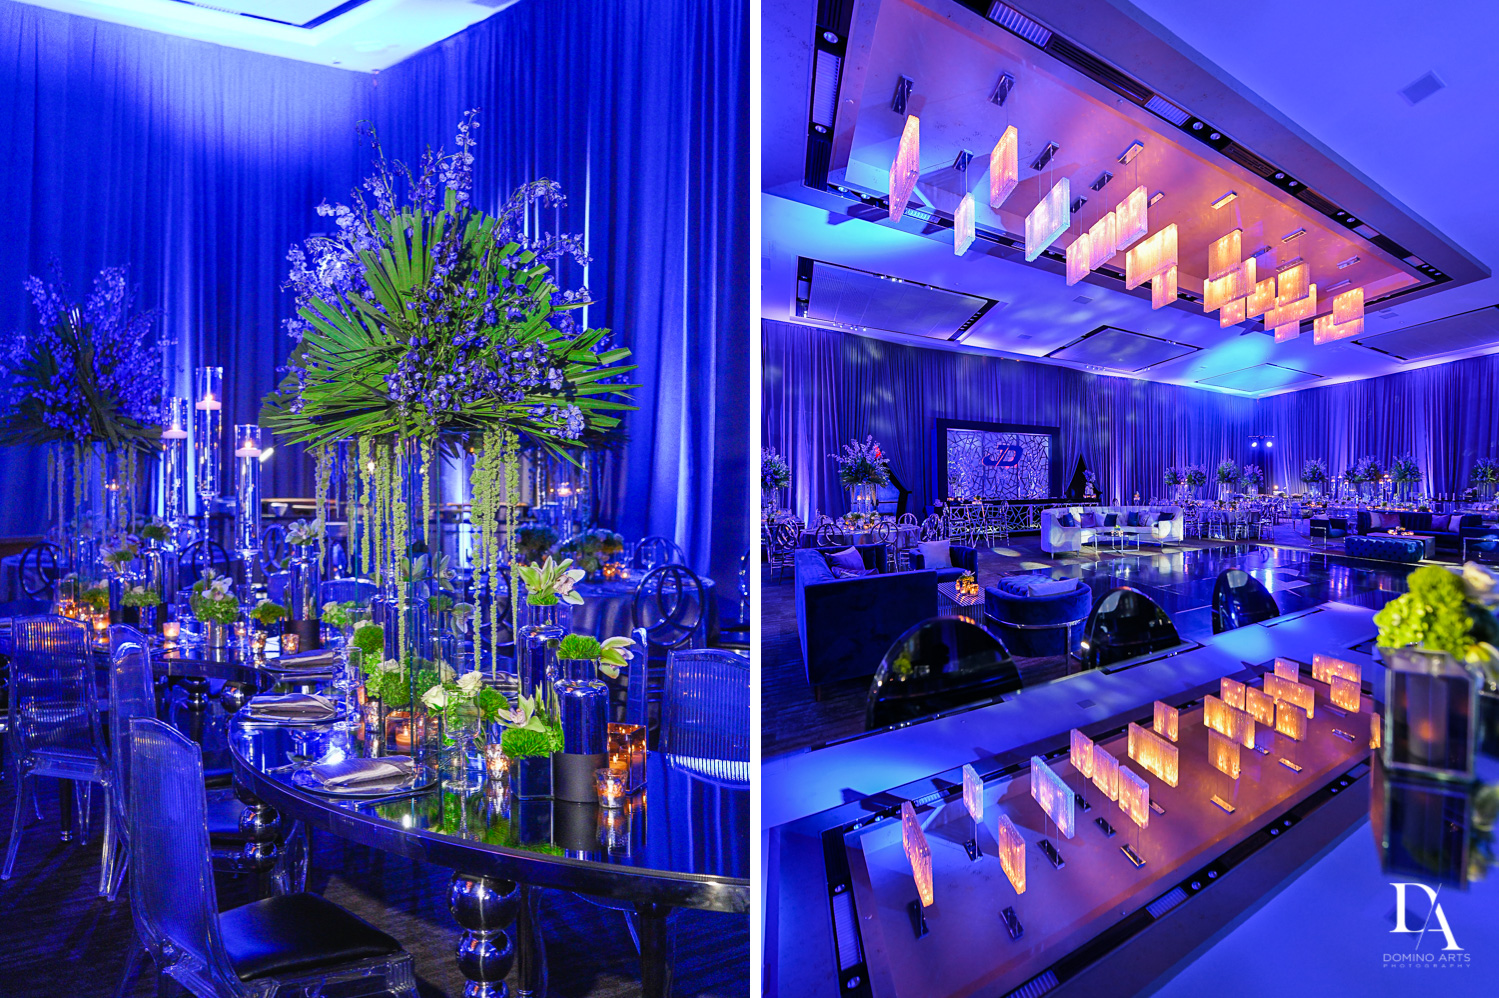 best mitzvah decor at Modern All Blue Decor Bar Mitzvah at Temple Beth Am Pinecrest by Domino Arts Photography